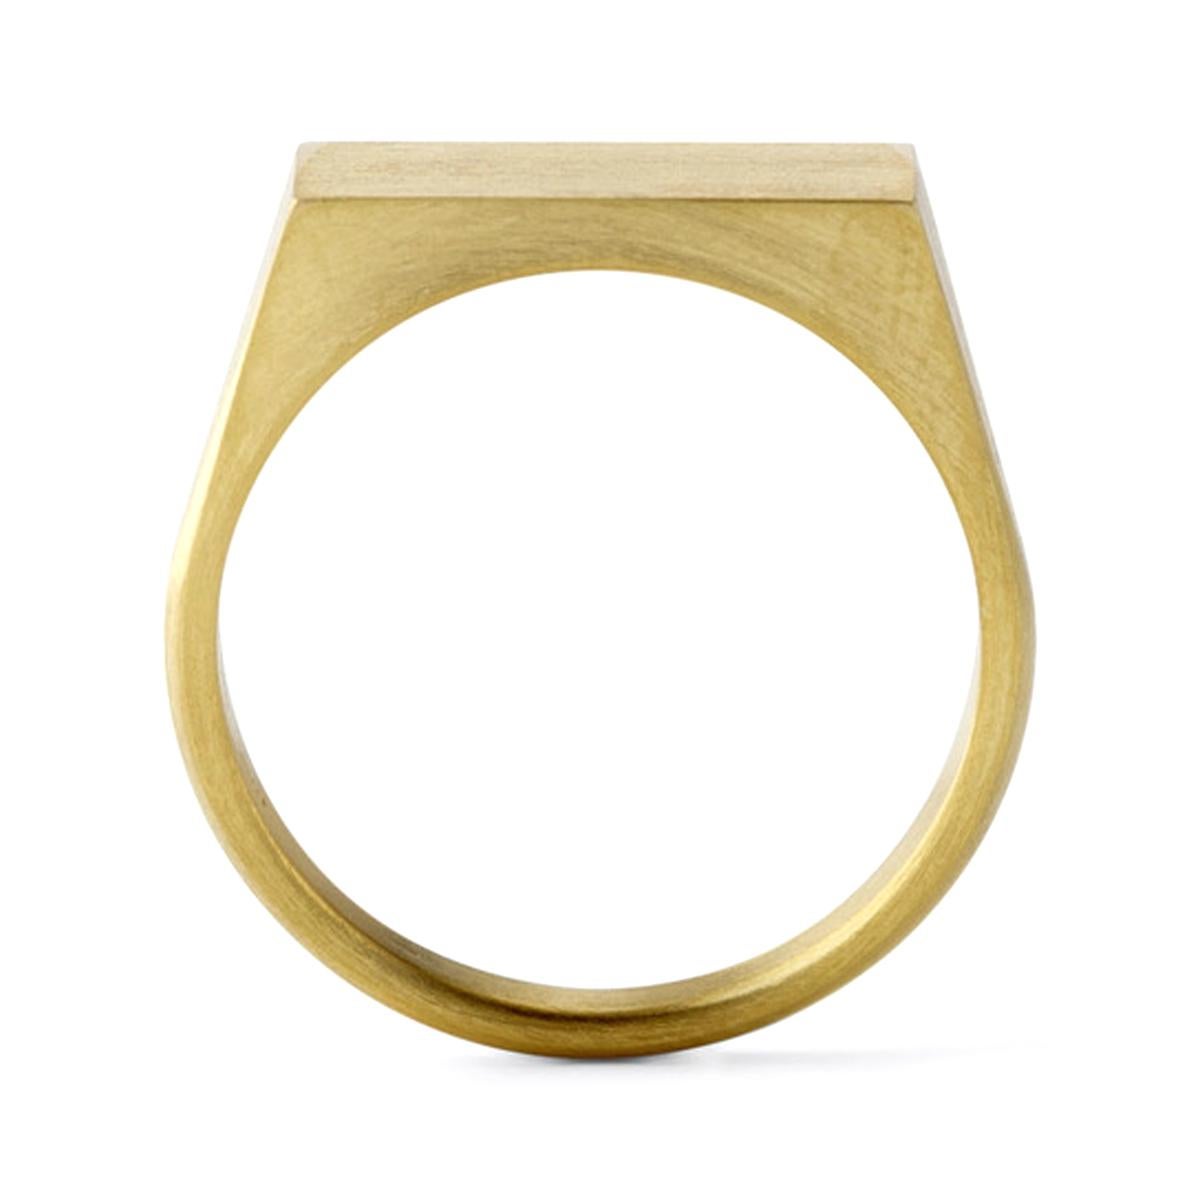 A classic rectangular signet ring. The signet surface and inside the ring band is polished in contrast with the surface of the ring band which is matte.

Japan Size #3～#12
Signet top measurements: 11.5mm x 4.7mm
This item is made-to-order.

Items